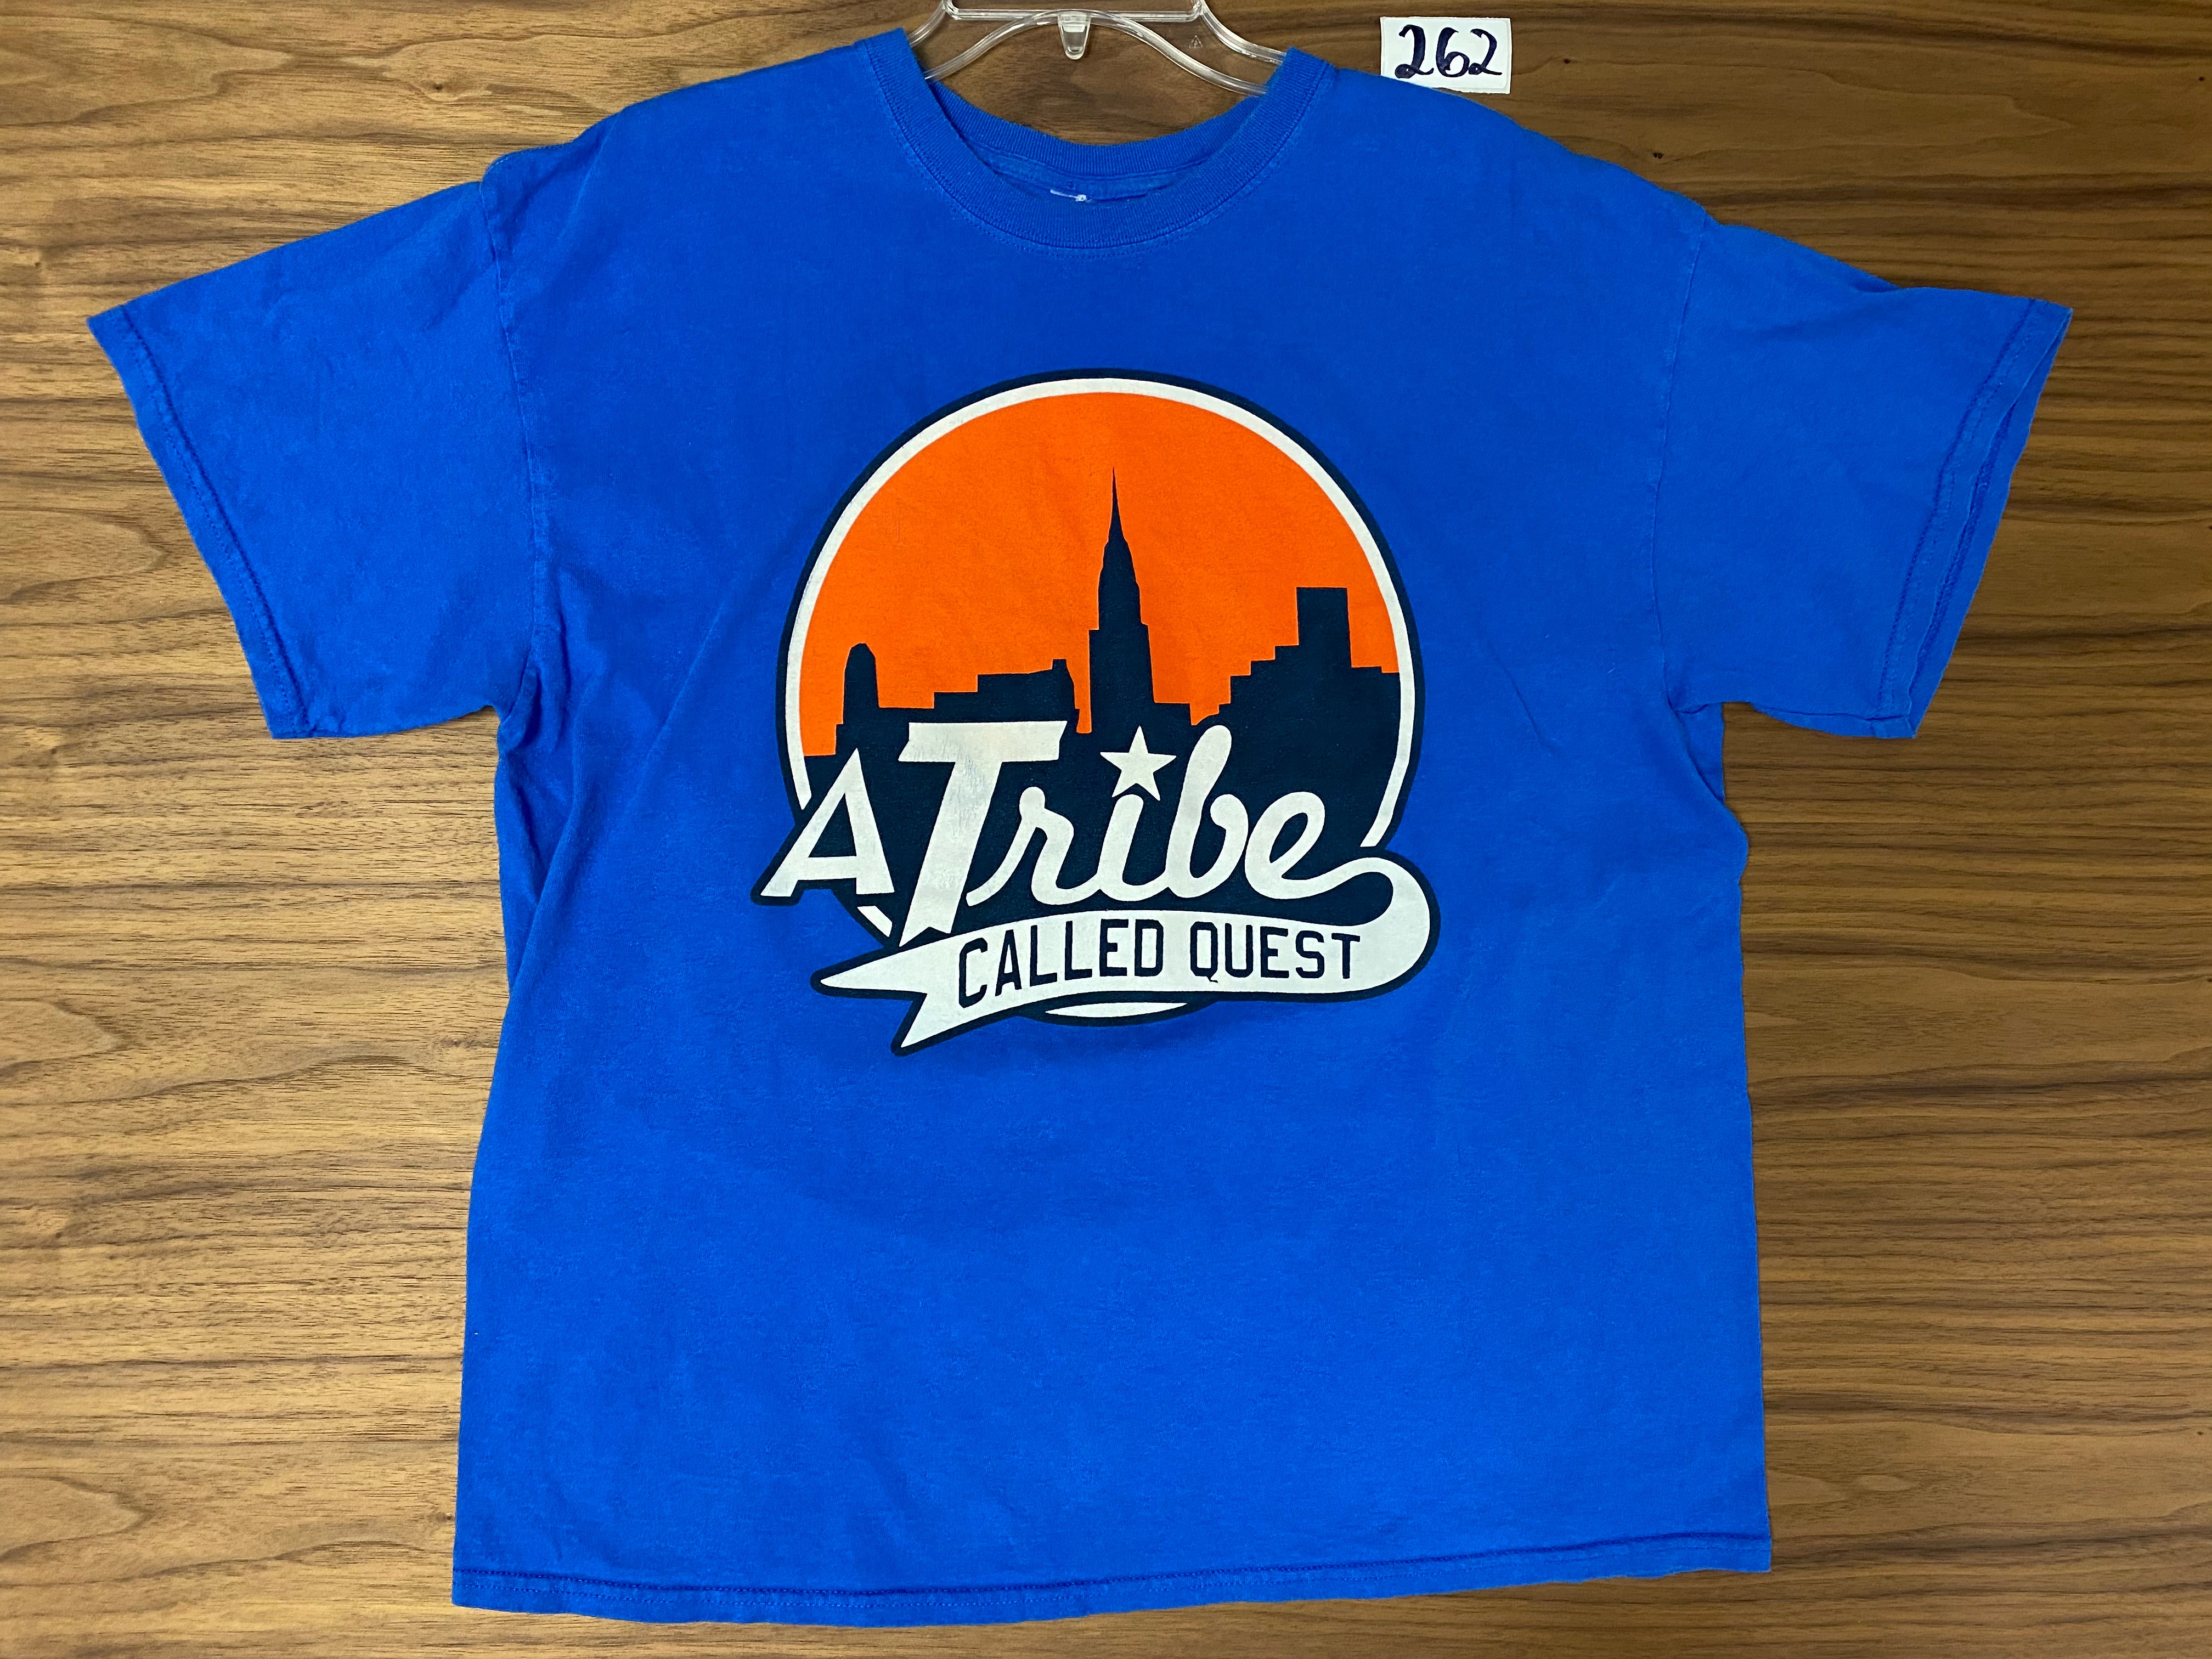 A Tribe Called Quest Tee - Blue